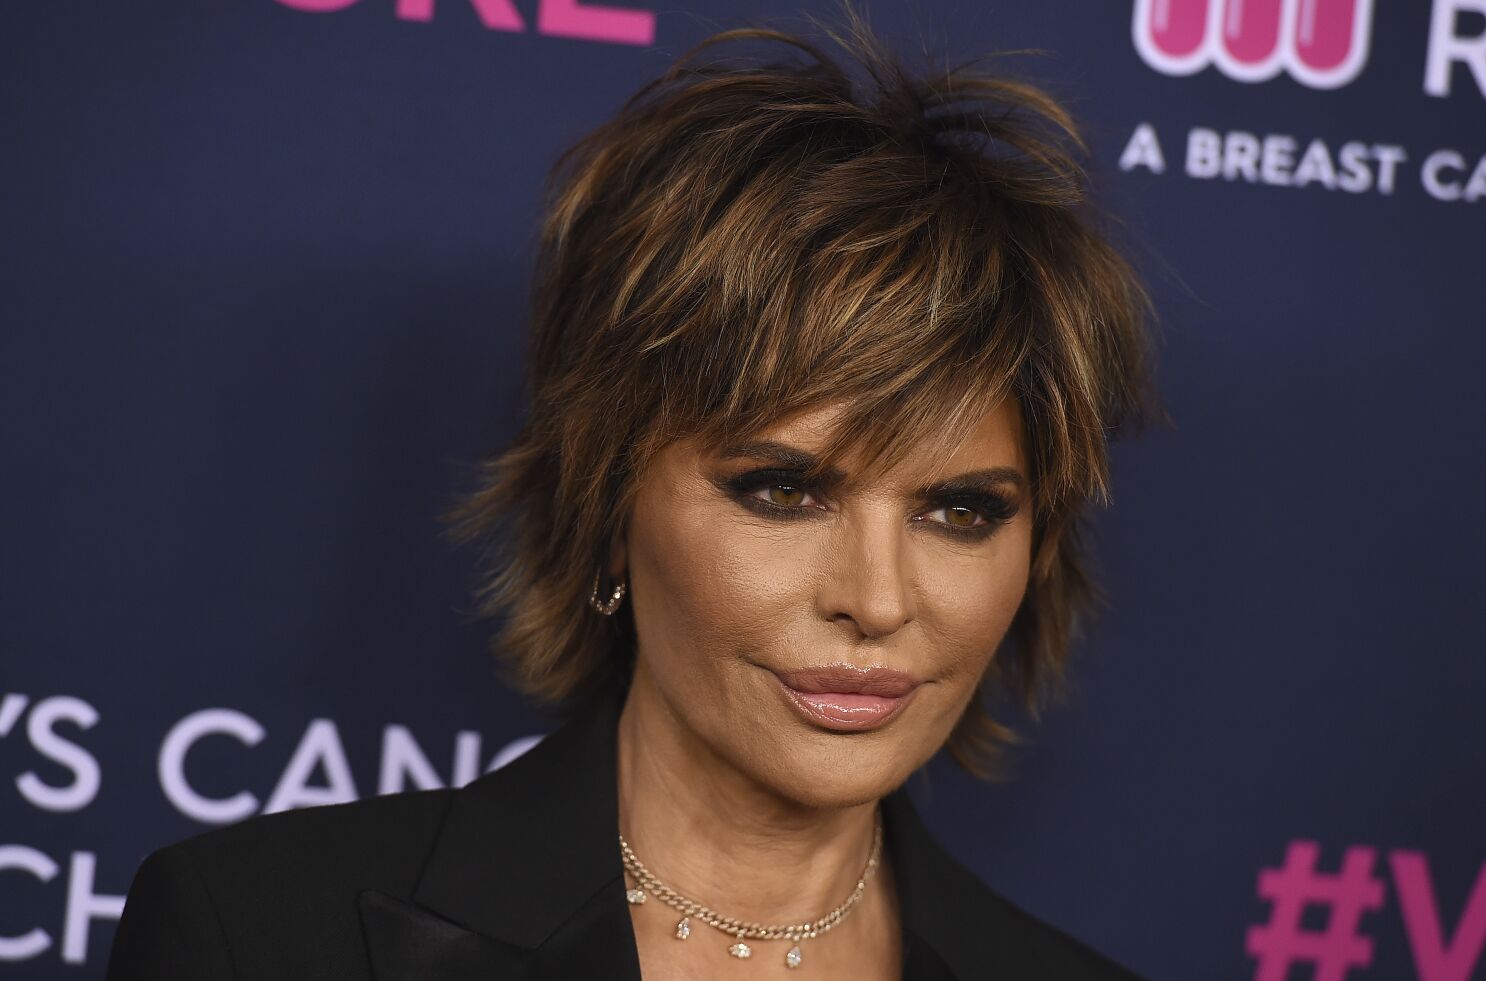 Lisa Rinna Demanding $2 Million and Highest Paid ‘Housewife’ Title For ‘RHOBH’ Season 13!